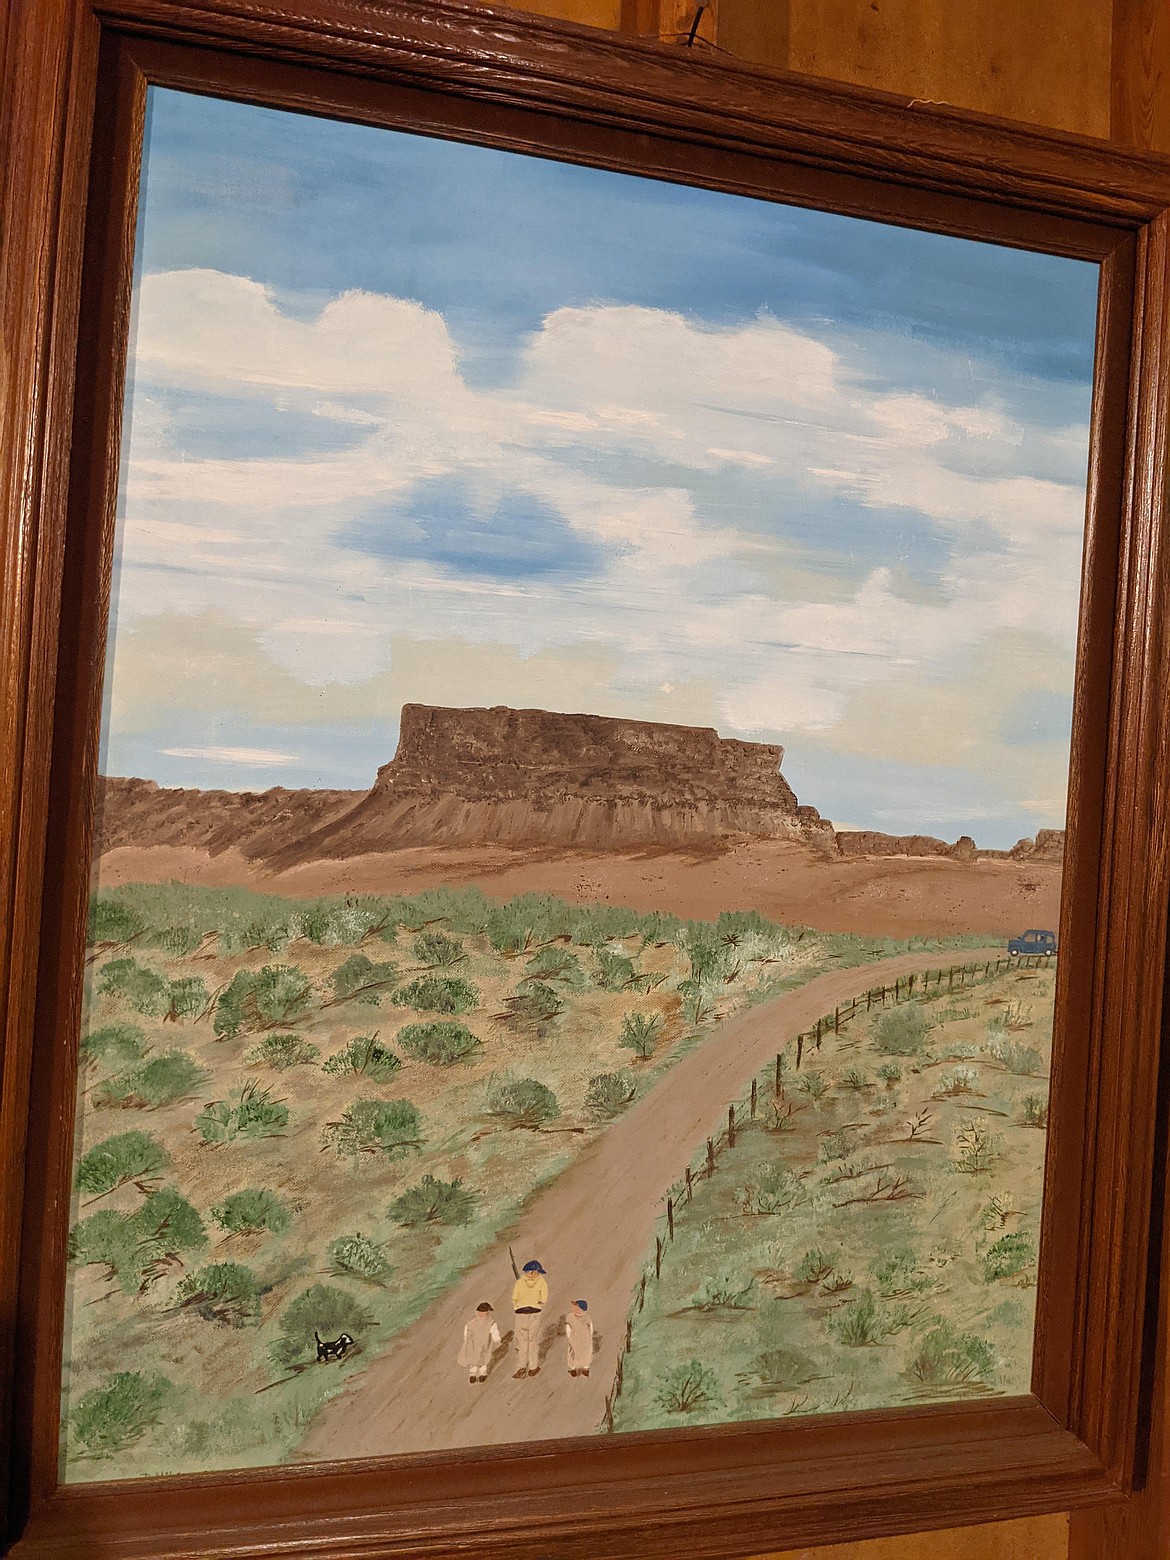 This was painted by Dolores Hilson, daughter of F. Godfrey, who was also an artist. A letter Godfrey wrote to Hilson in 1936 was discovered in the back of one of his paintings. The letter and painting will be given to Dolores' daughters, who live in the Northwest.